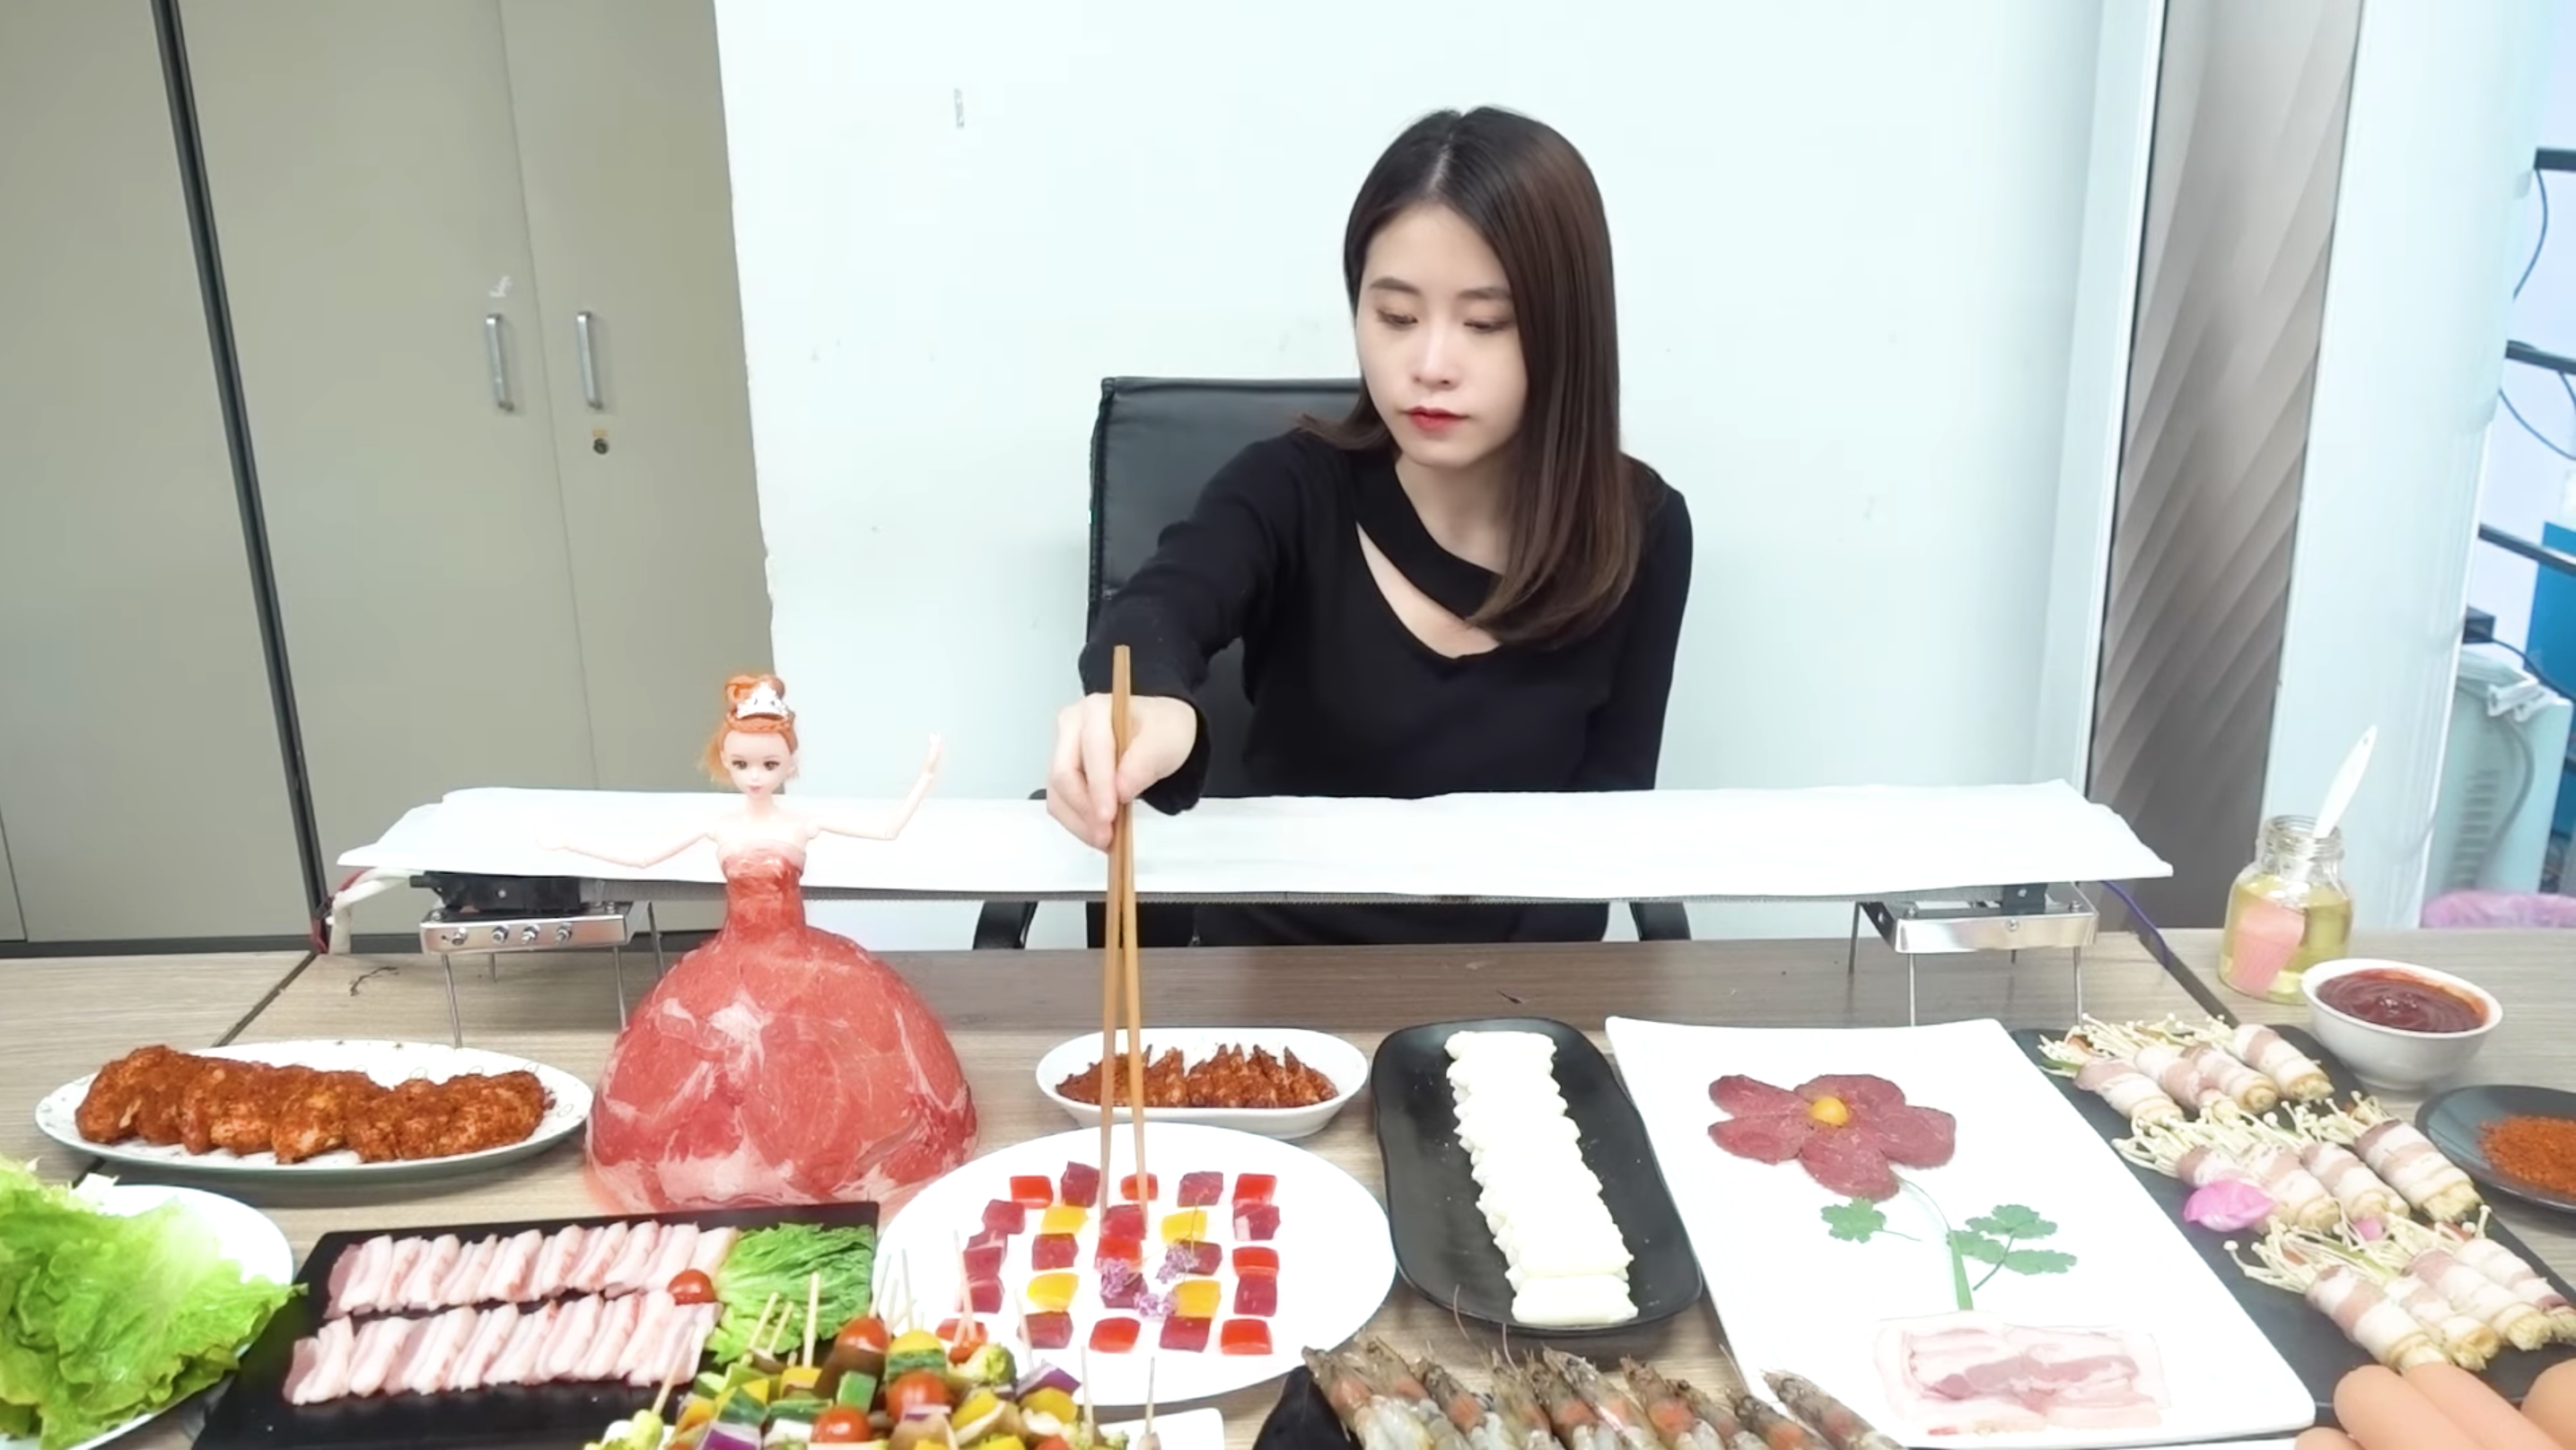 Ms. Yeah uses an air conditioner as a makeshift barbecue (credit: YouTube)